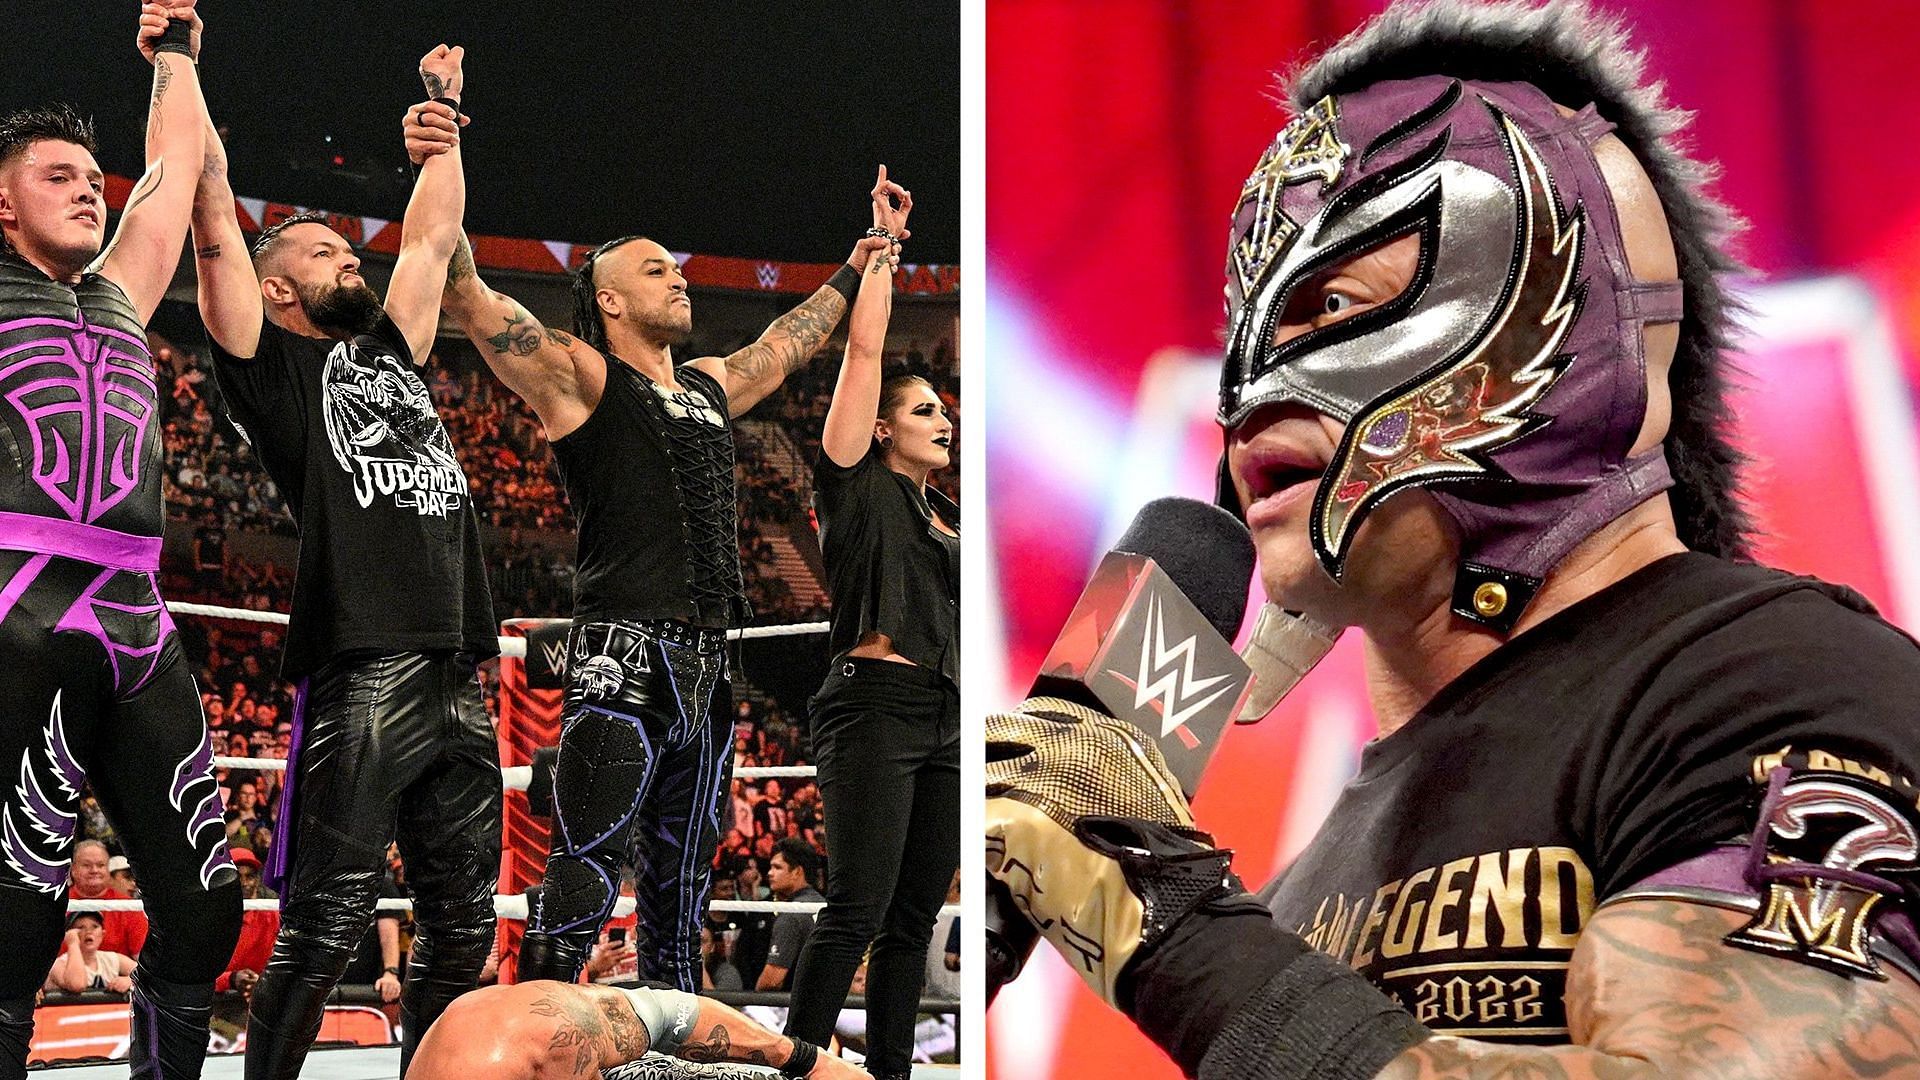 Rey Mysterio will likely need assistance from other WWE Superstars against Judgment Day